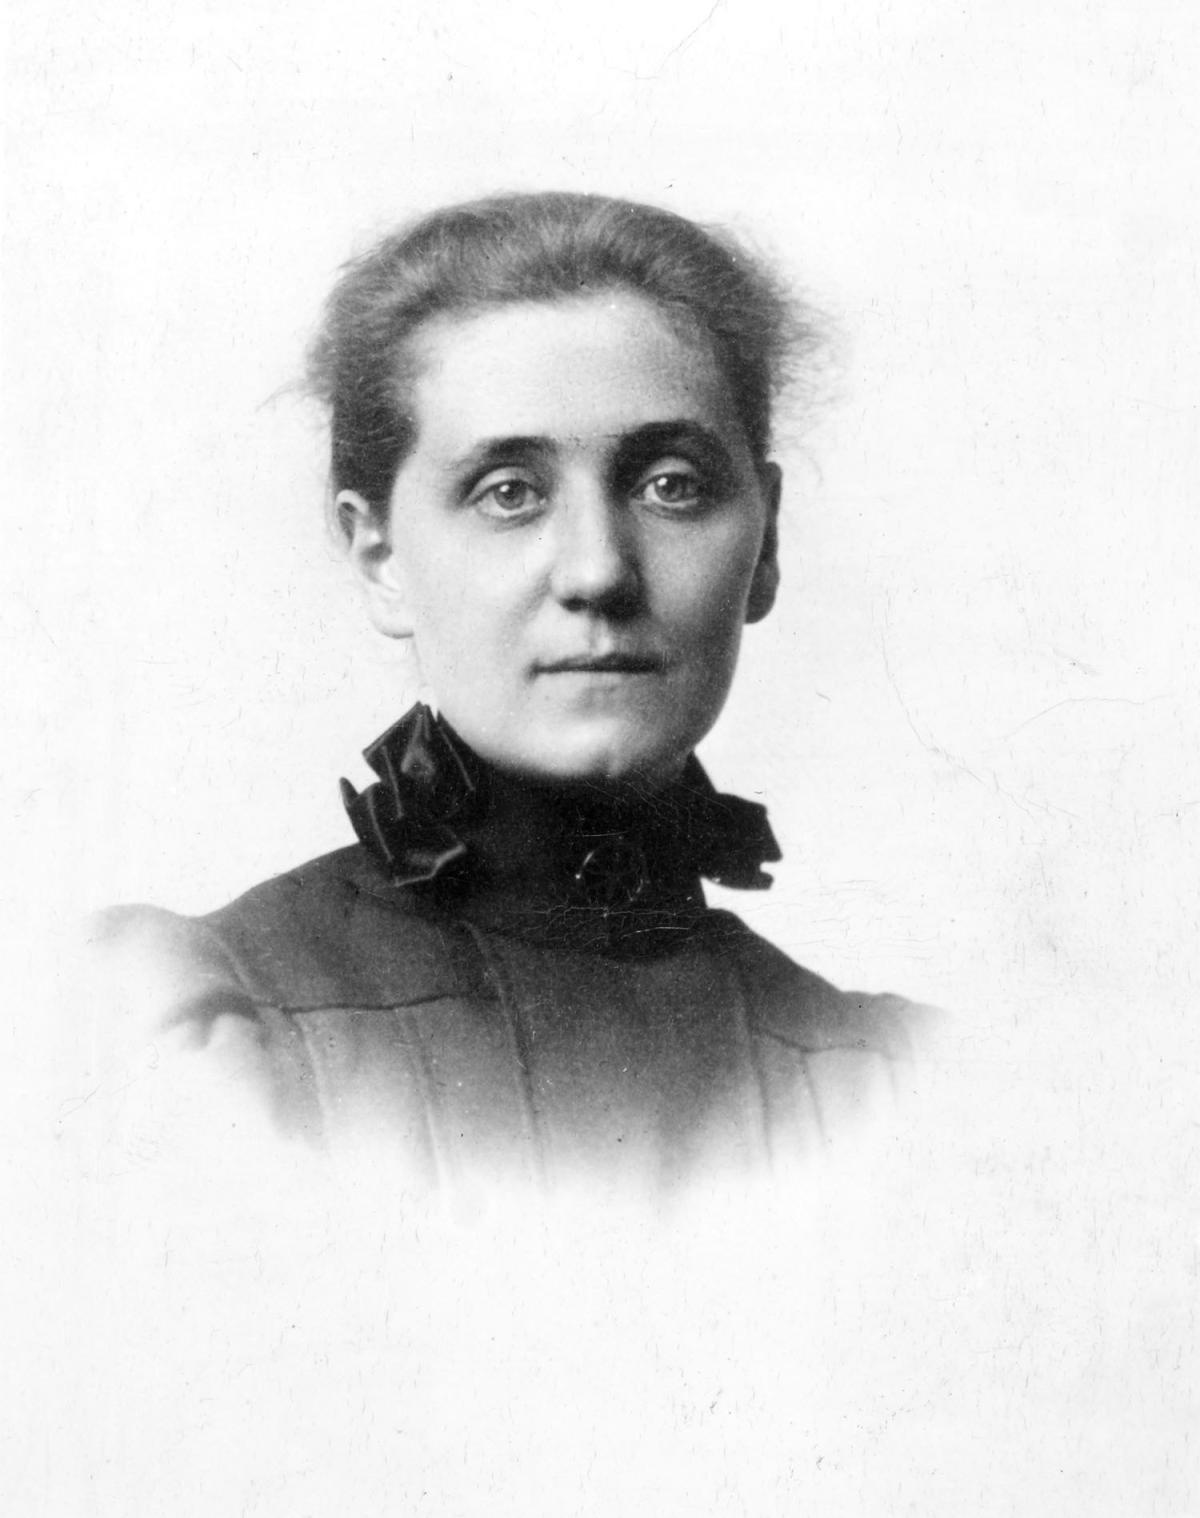 Jane Addams in the1890s.